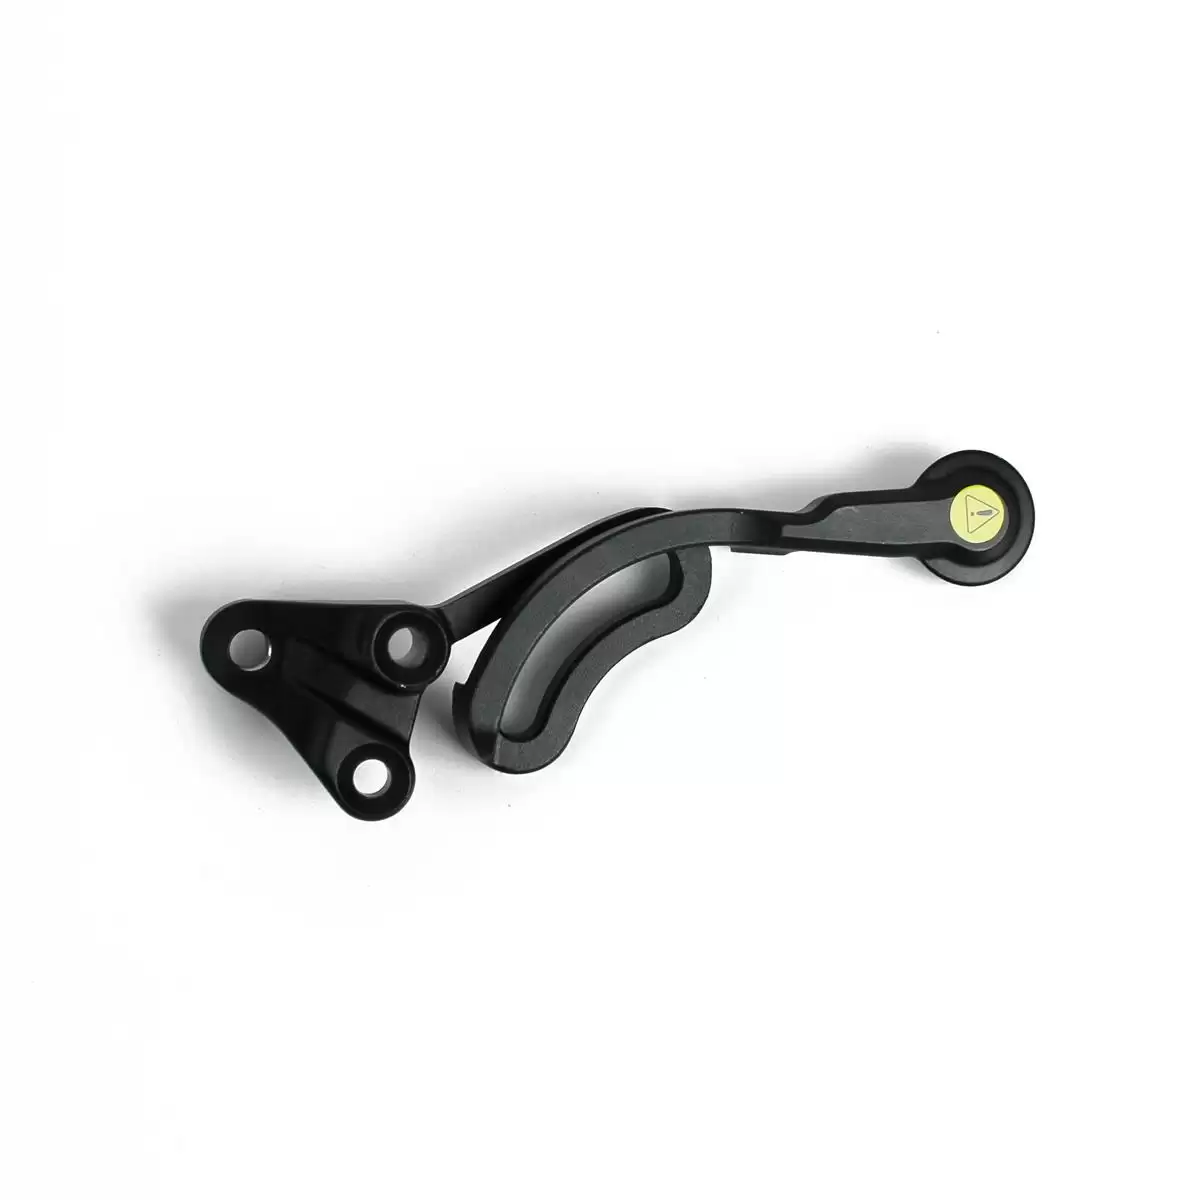 Spare torque arm for Powerplay models #1